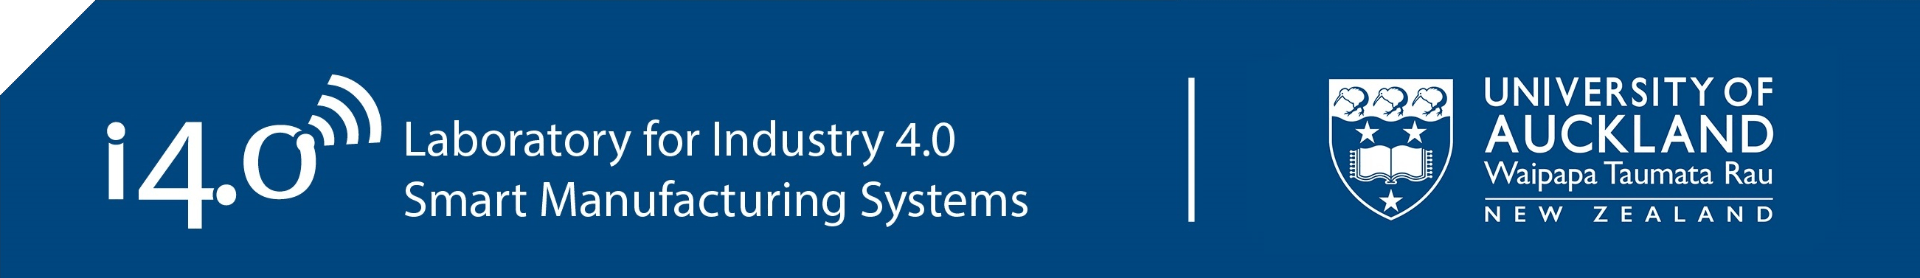 Laboratory for Industry 4.0 Smart Manufacturing Systems